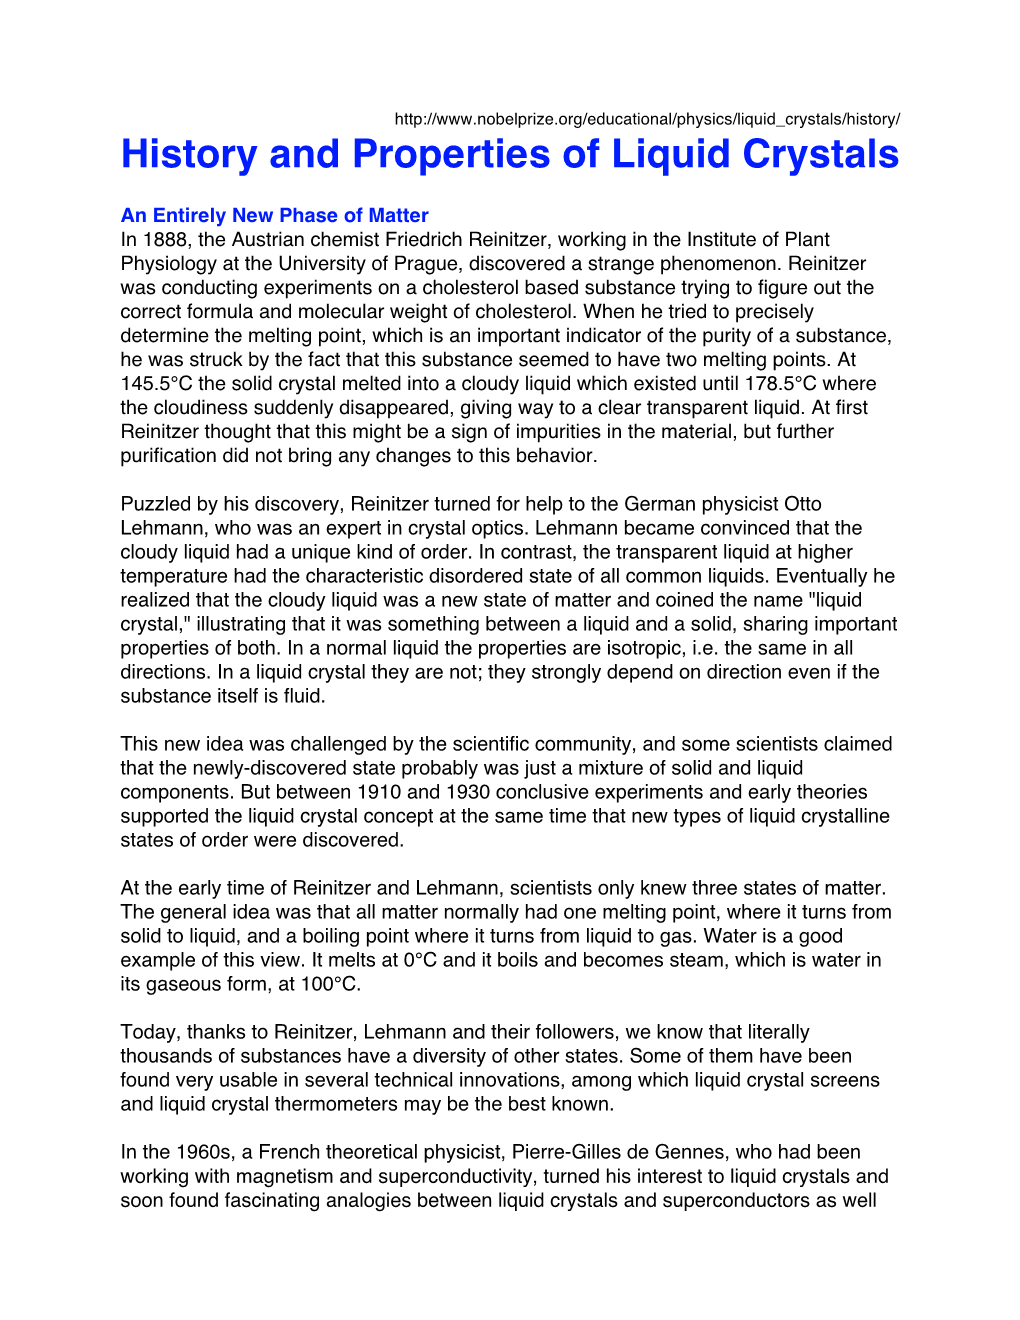 History and Properties of Liquid Crystals